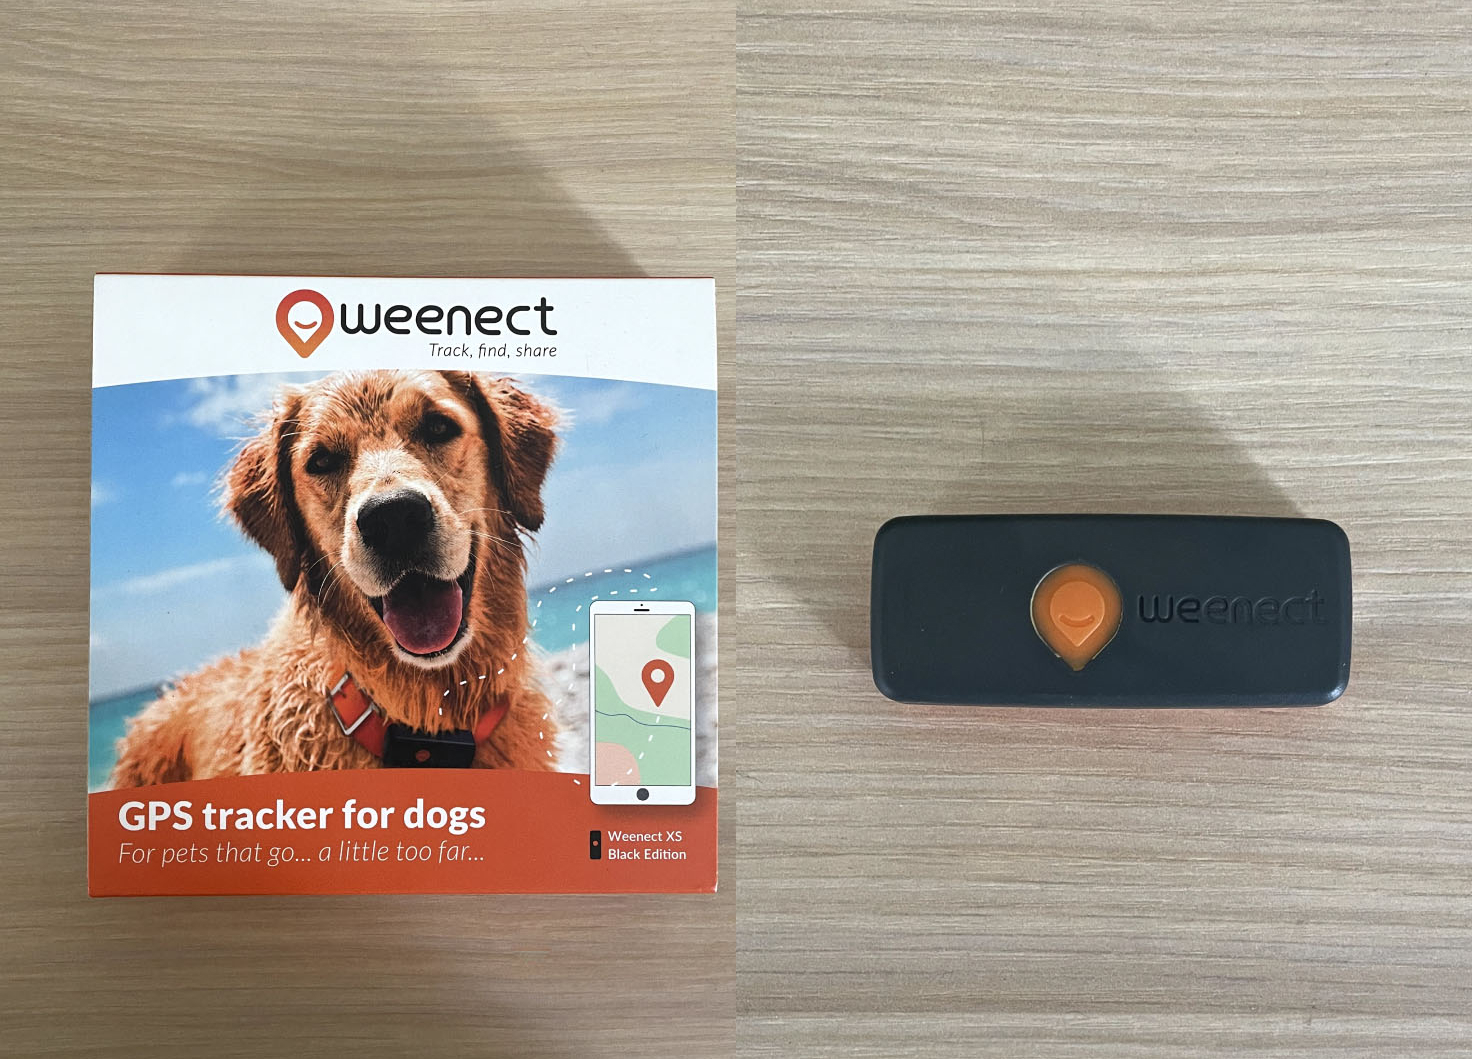 Collier GPS pour chien Weenect XS